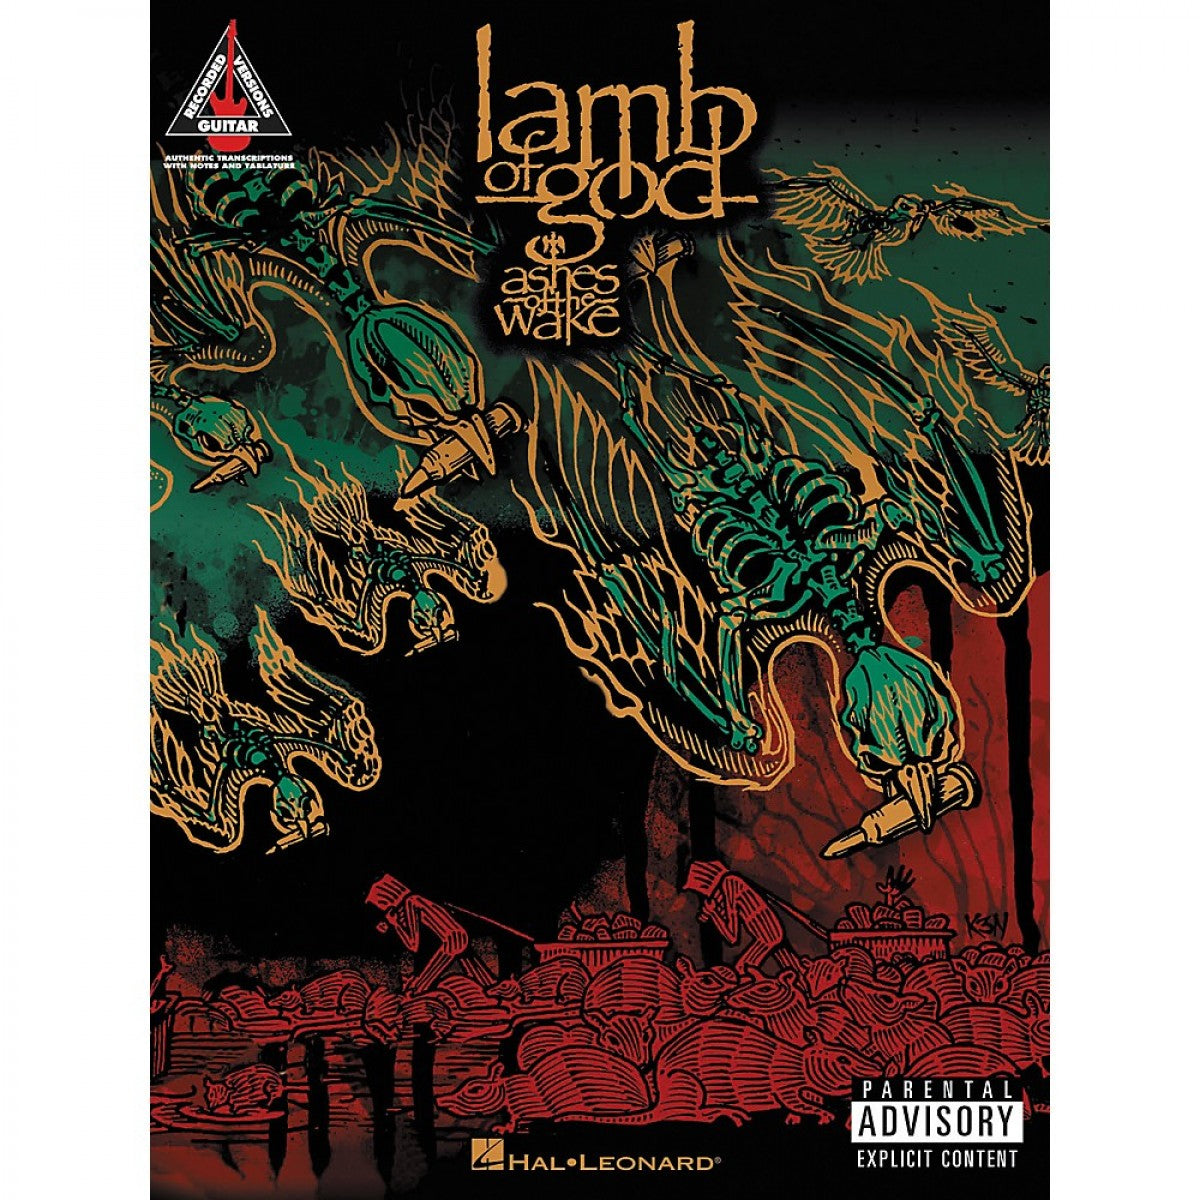 LAMB OF GOD – ASHES OF THE WAKE – Music Chamber